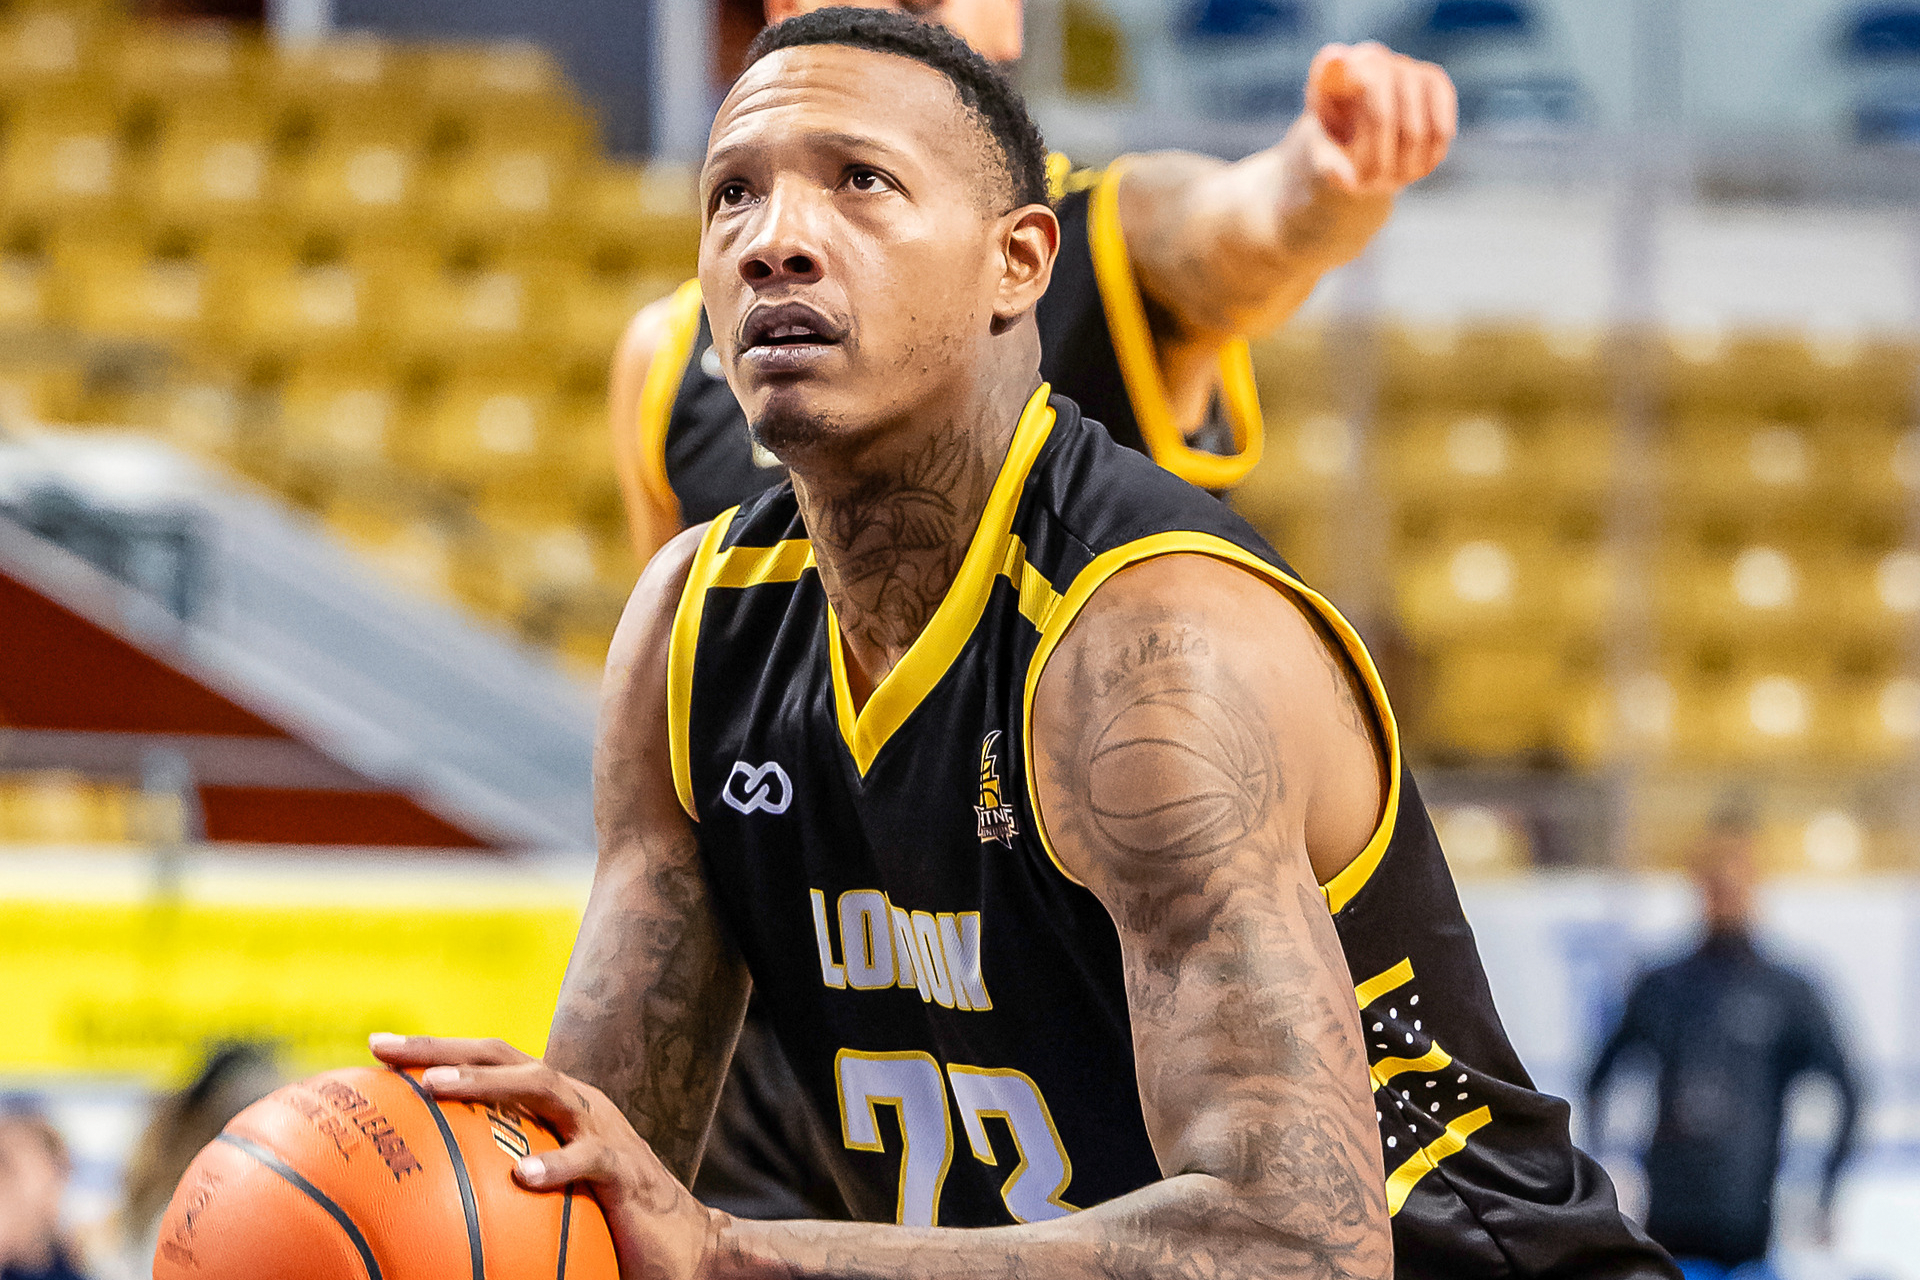 London Lightning Electrify the Montreal Toundra with a 109-98 win!